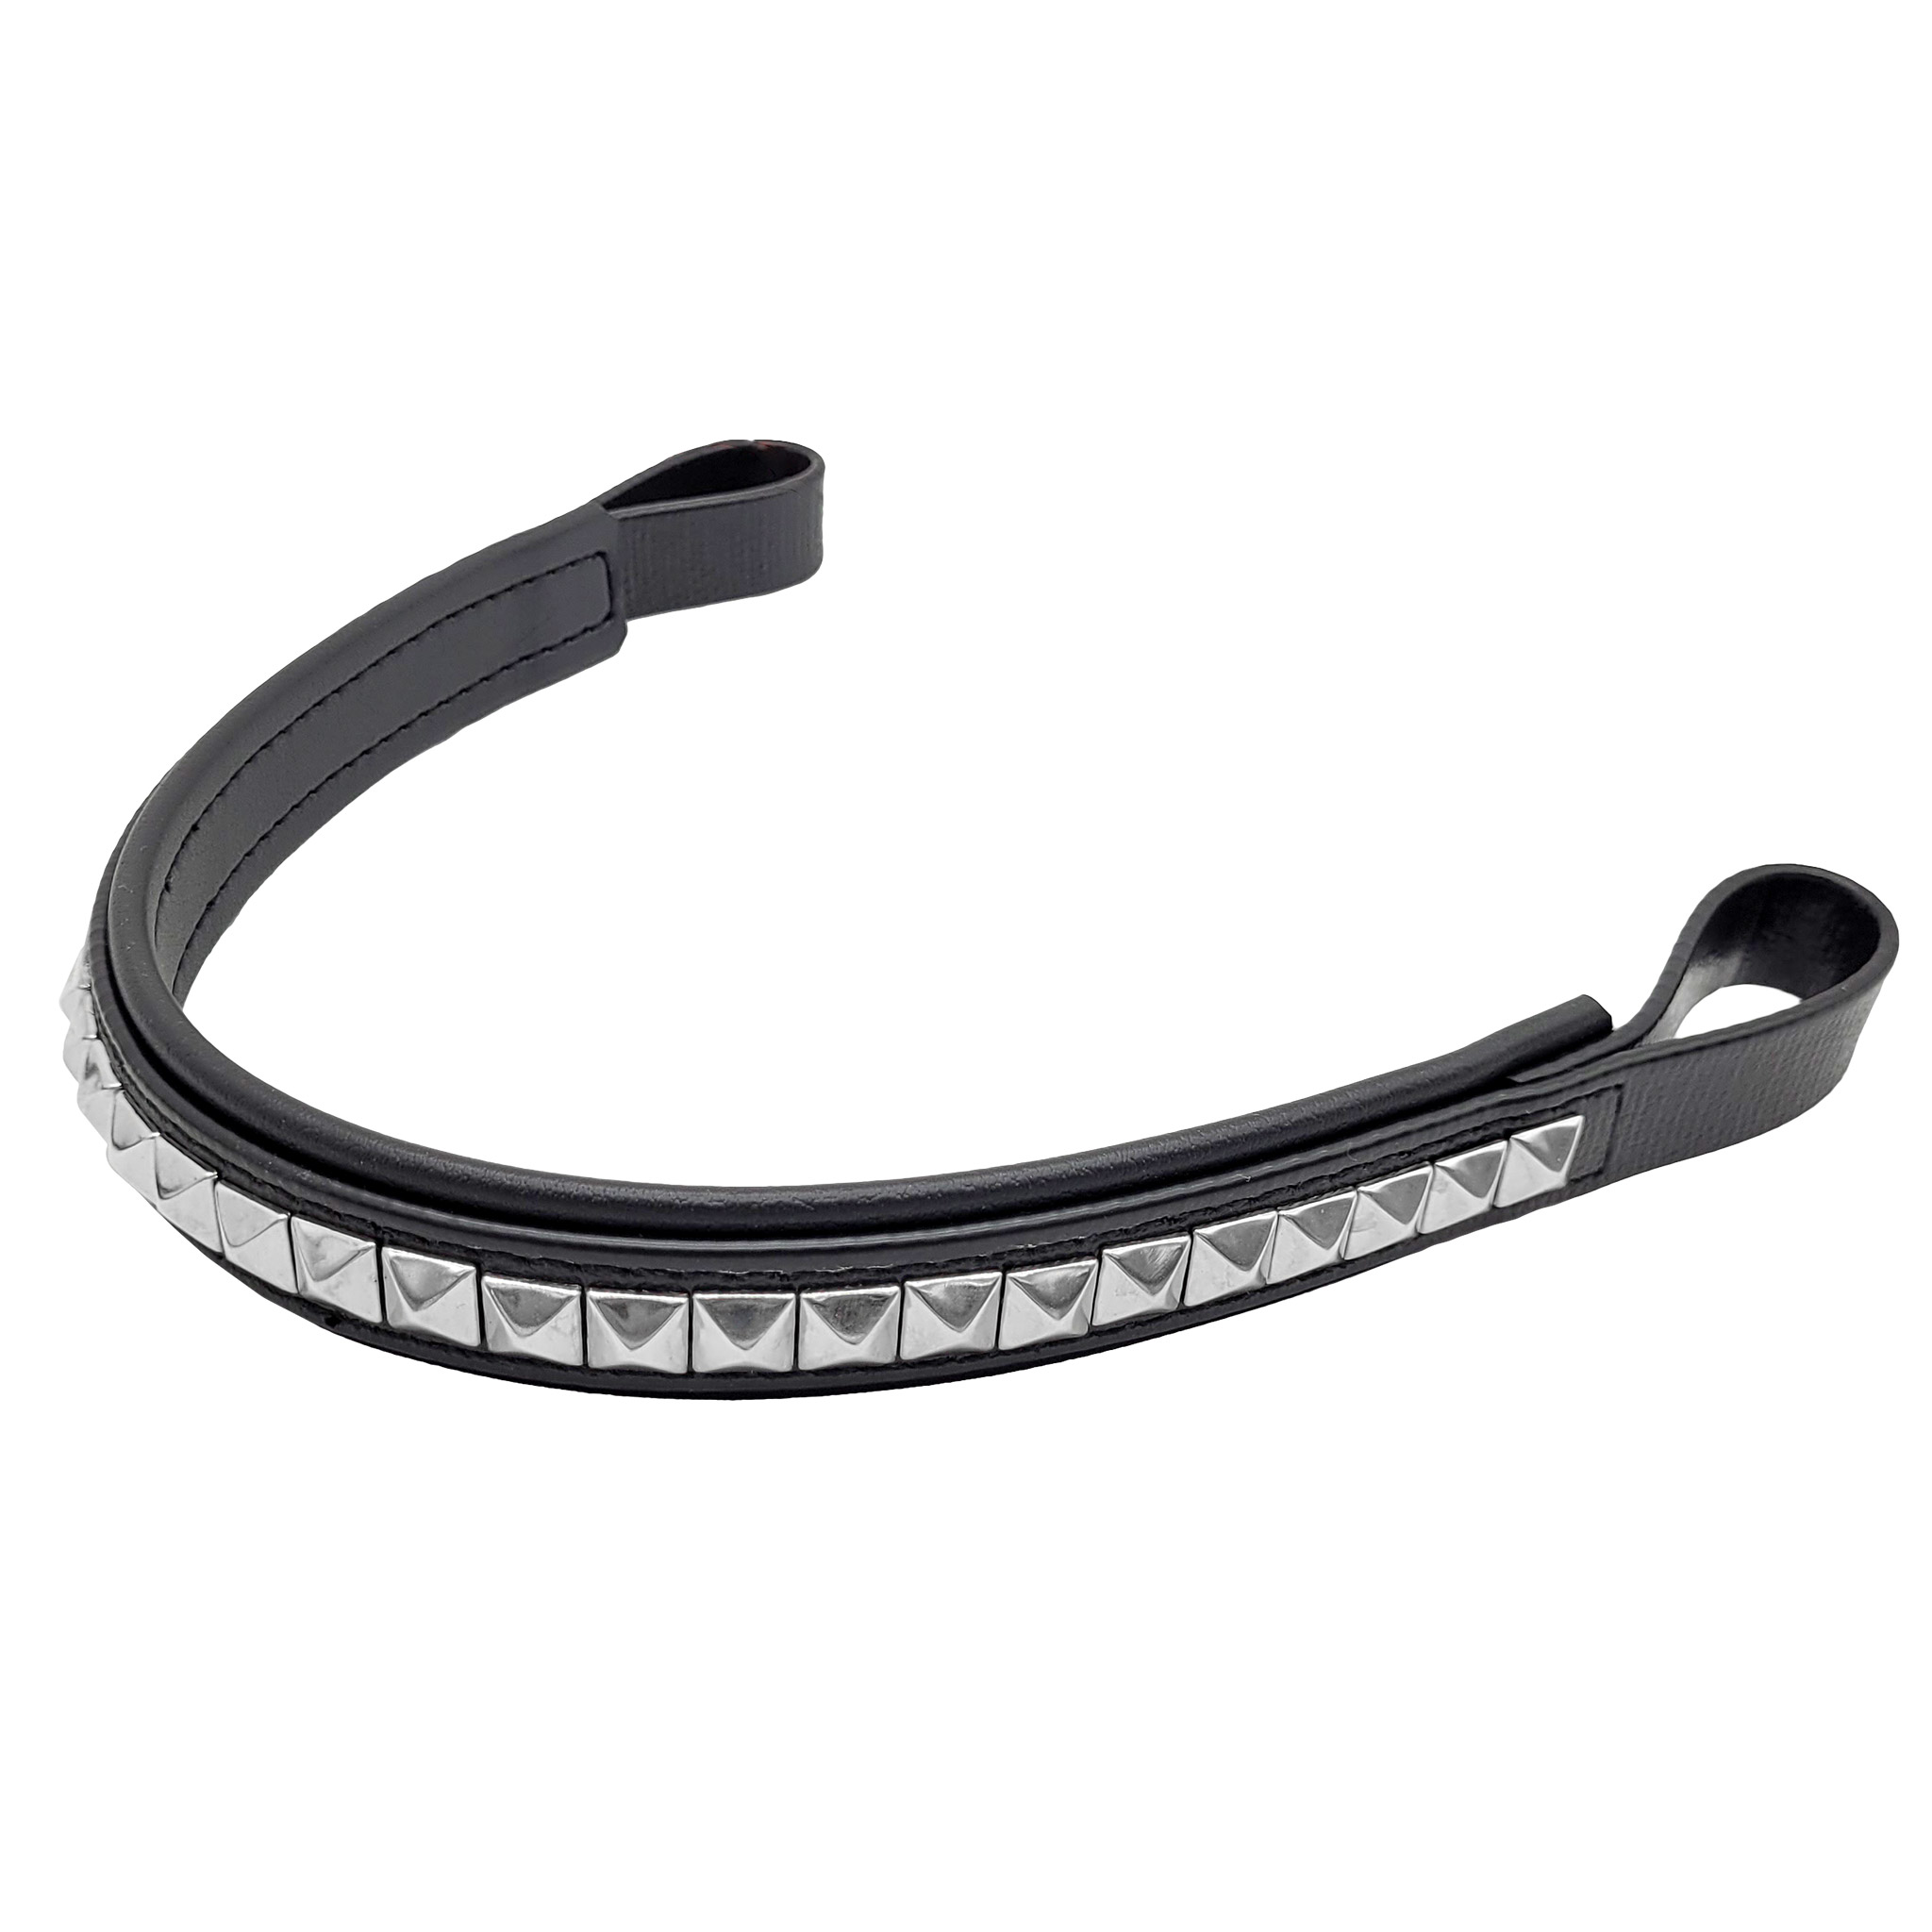 Frontal d'attelage Silver stud Zilco